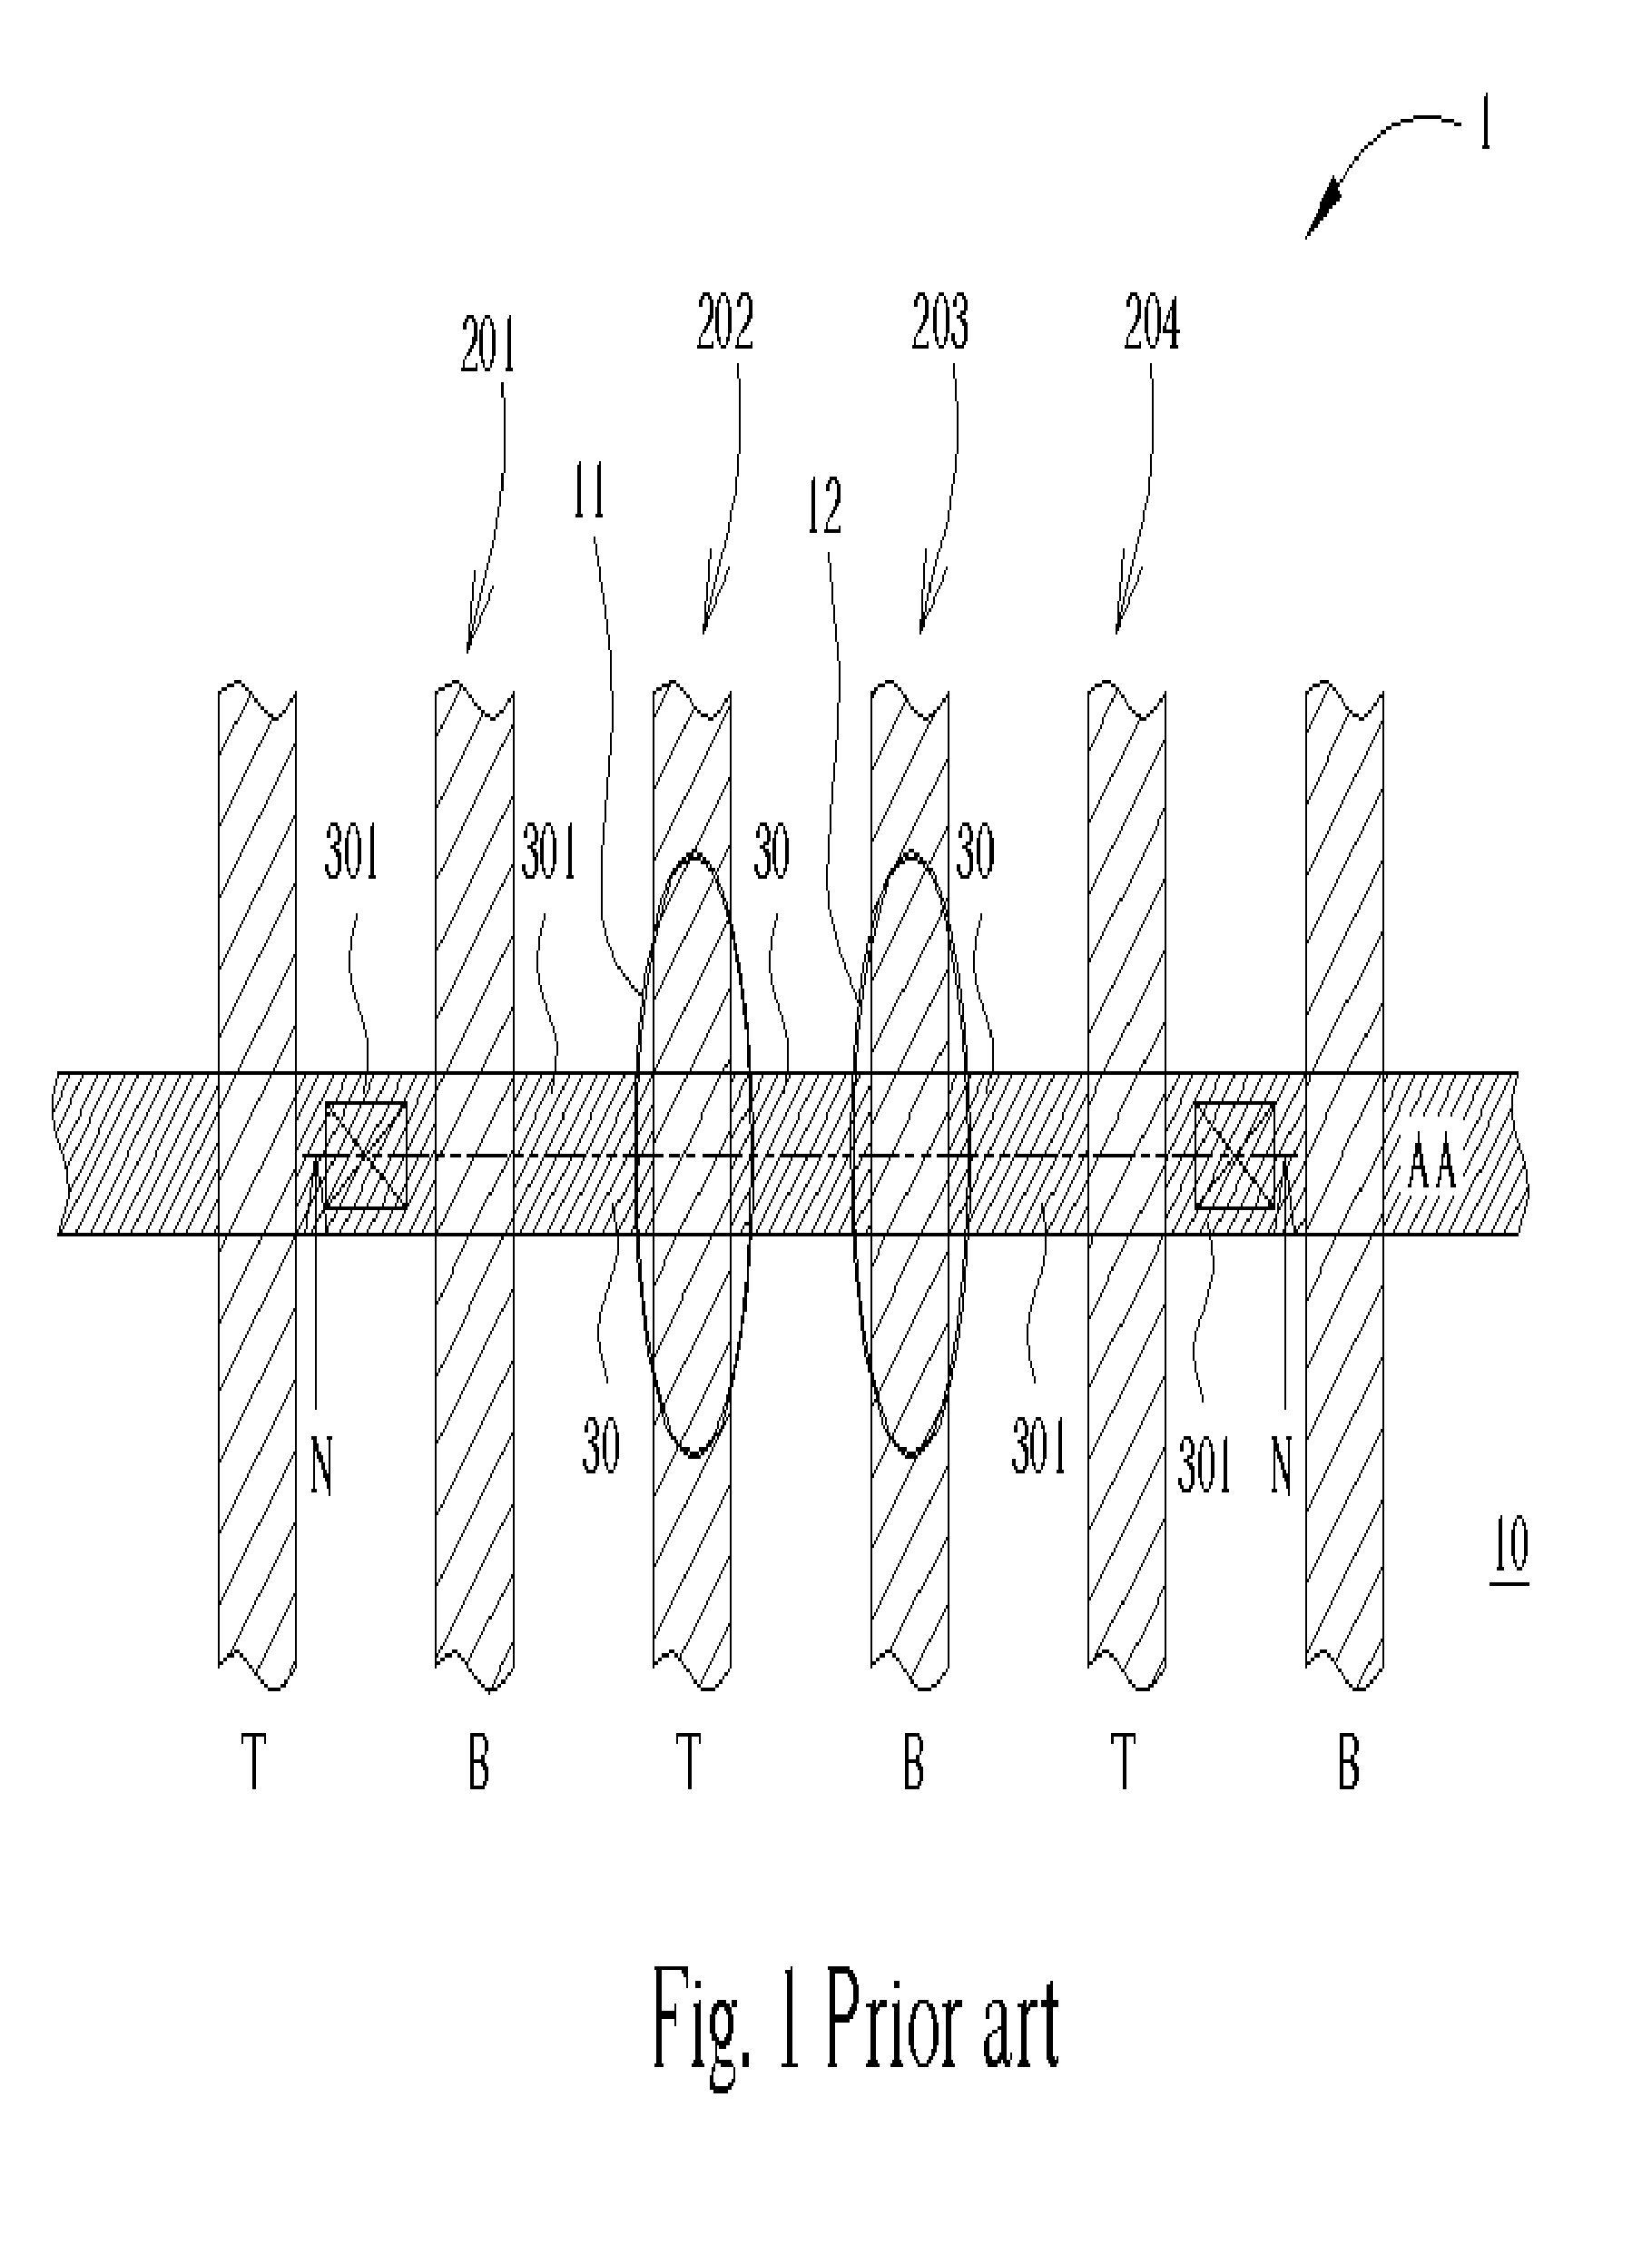 Wafer acceptance testing method and structure of a test key used in the method